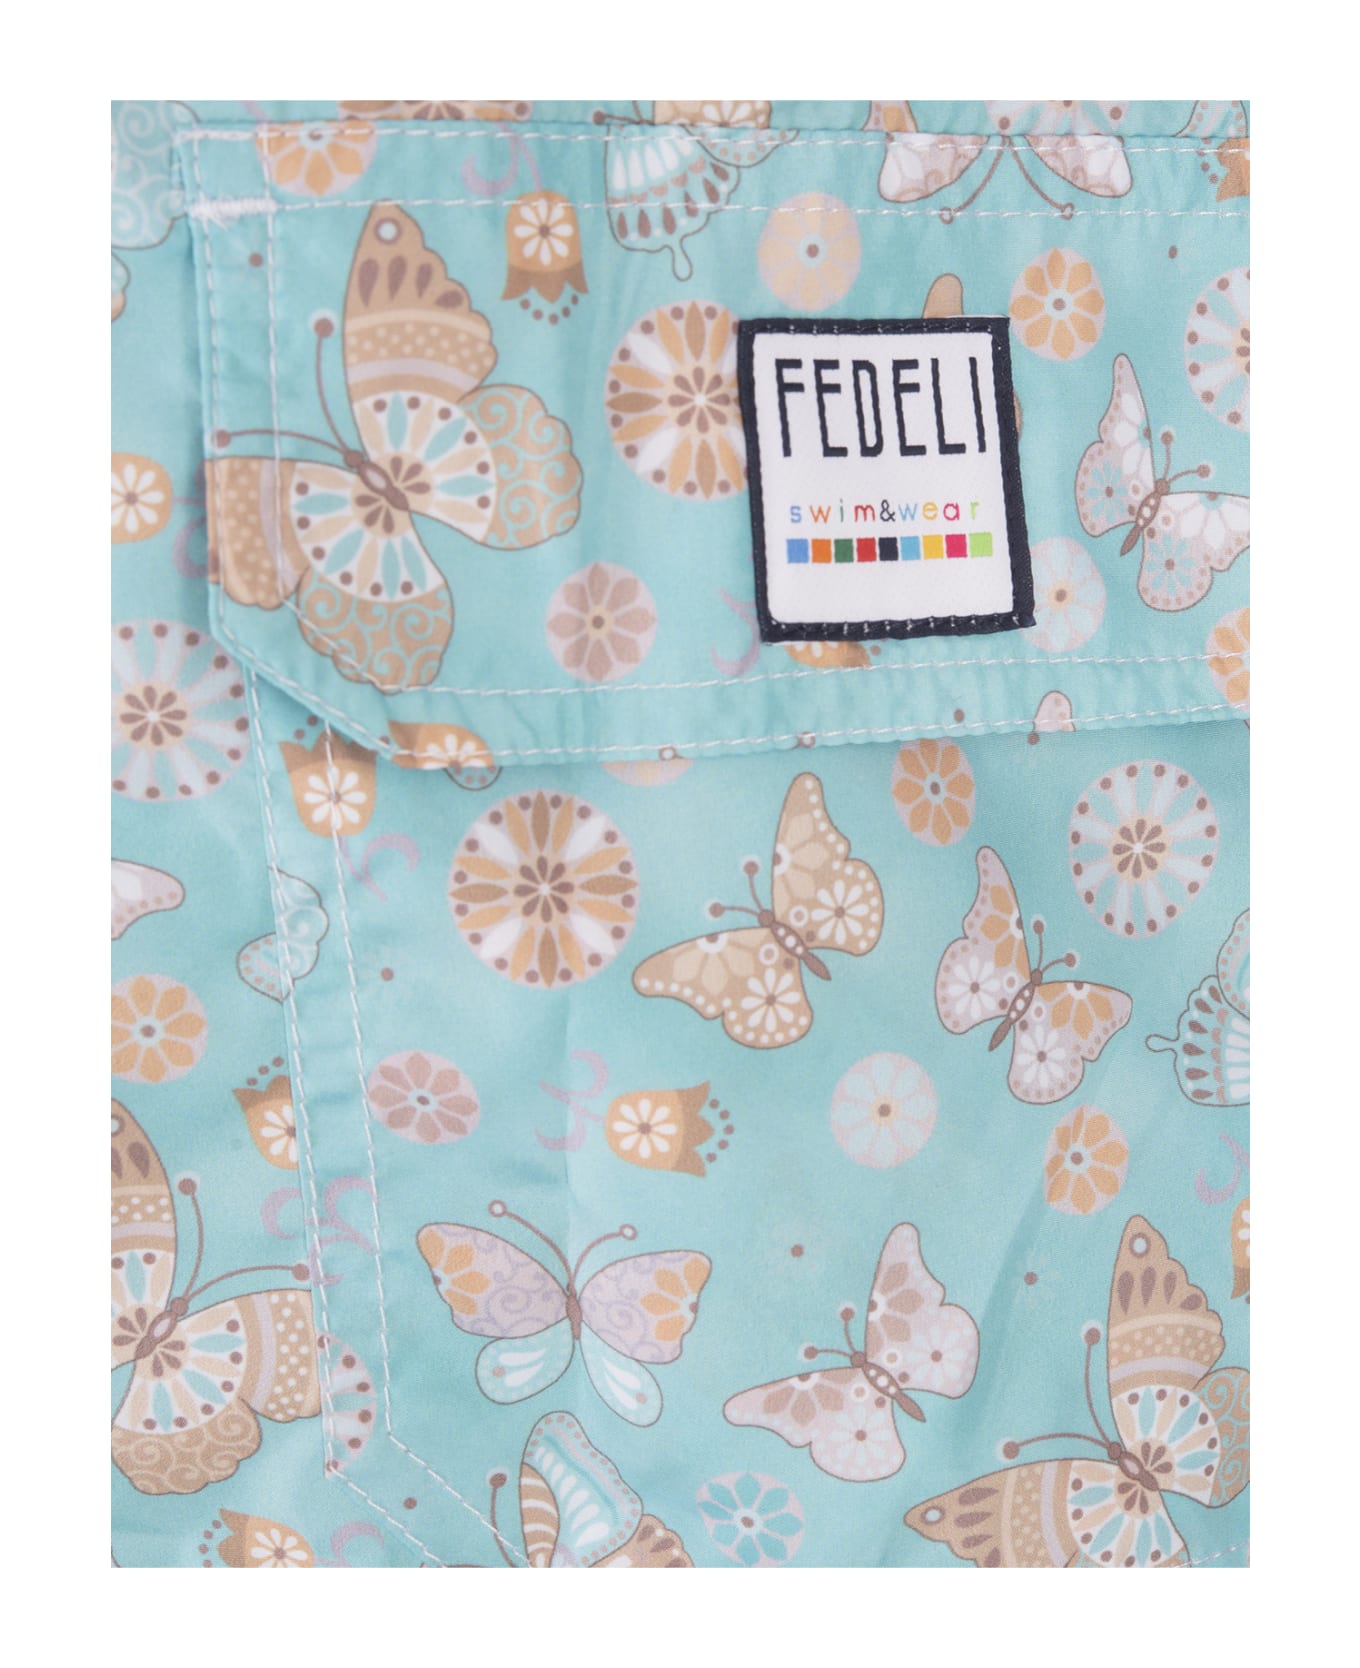 Fedeli Light Blue Swim Shorts With Butterfly Print - Blue